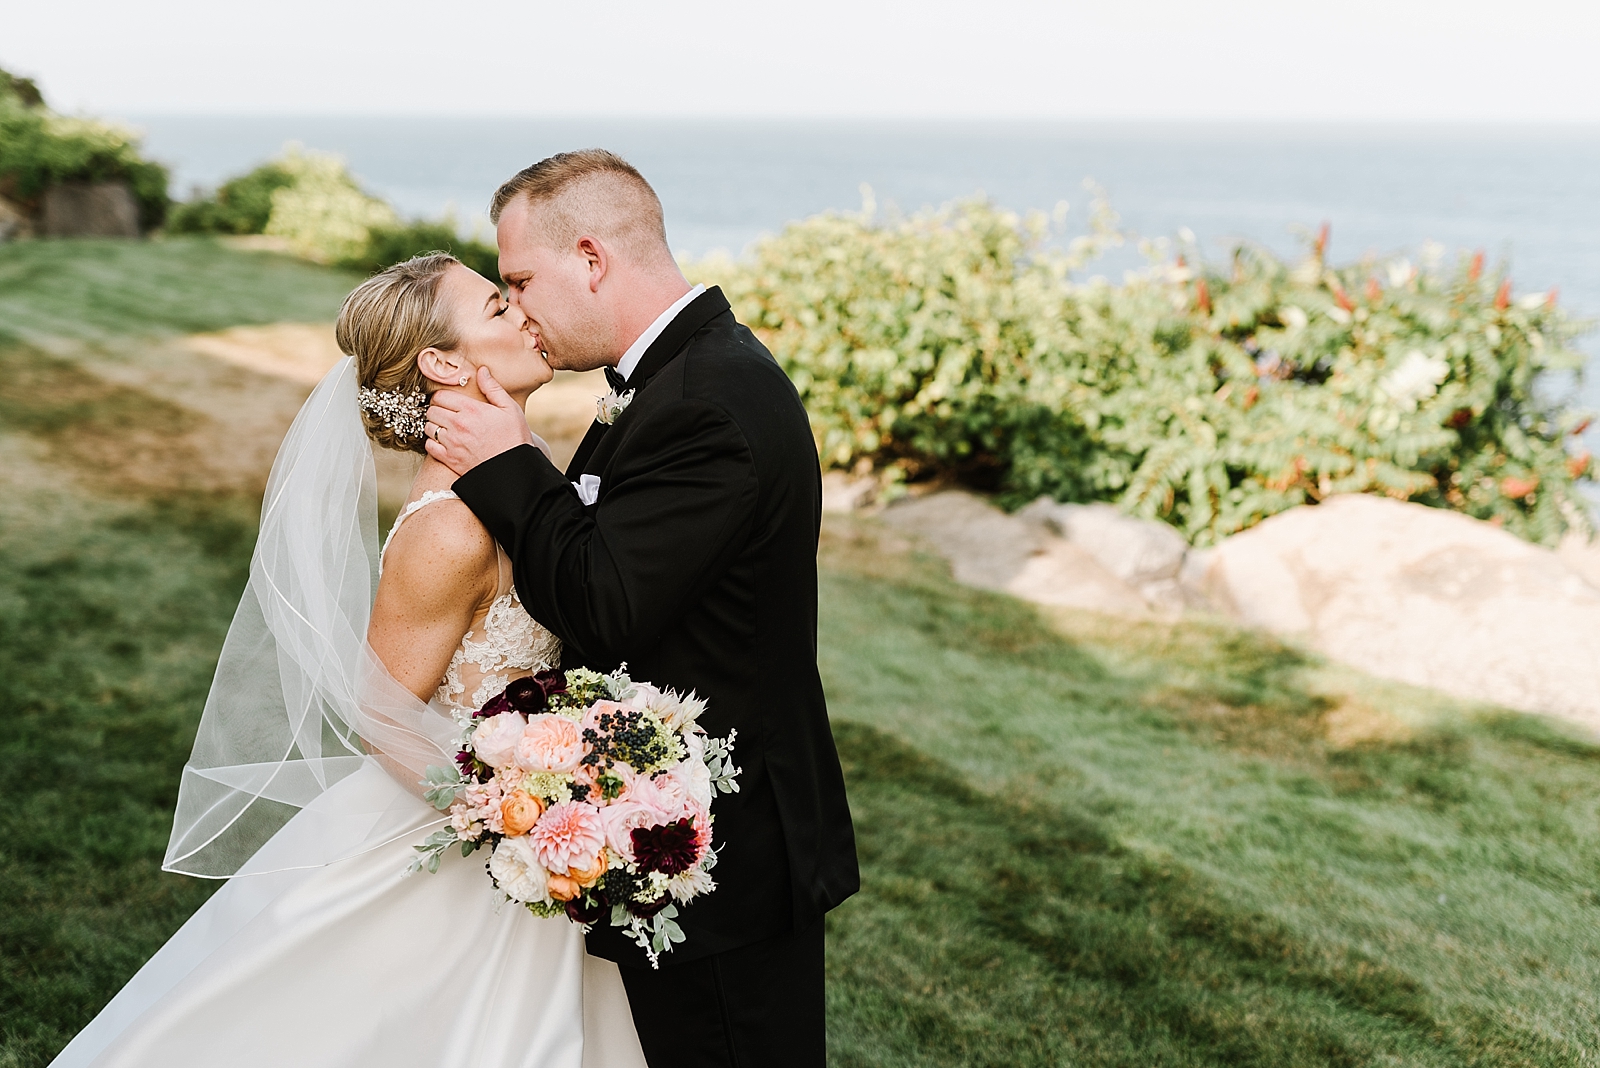 Sunny Summer Wedding at Viewpoint Hotel in York, Maine by Boston Wedding Photographer Annmarie Swift